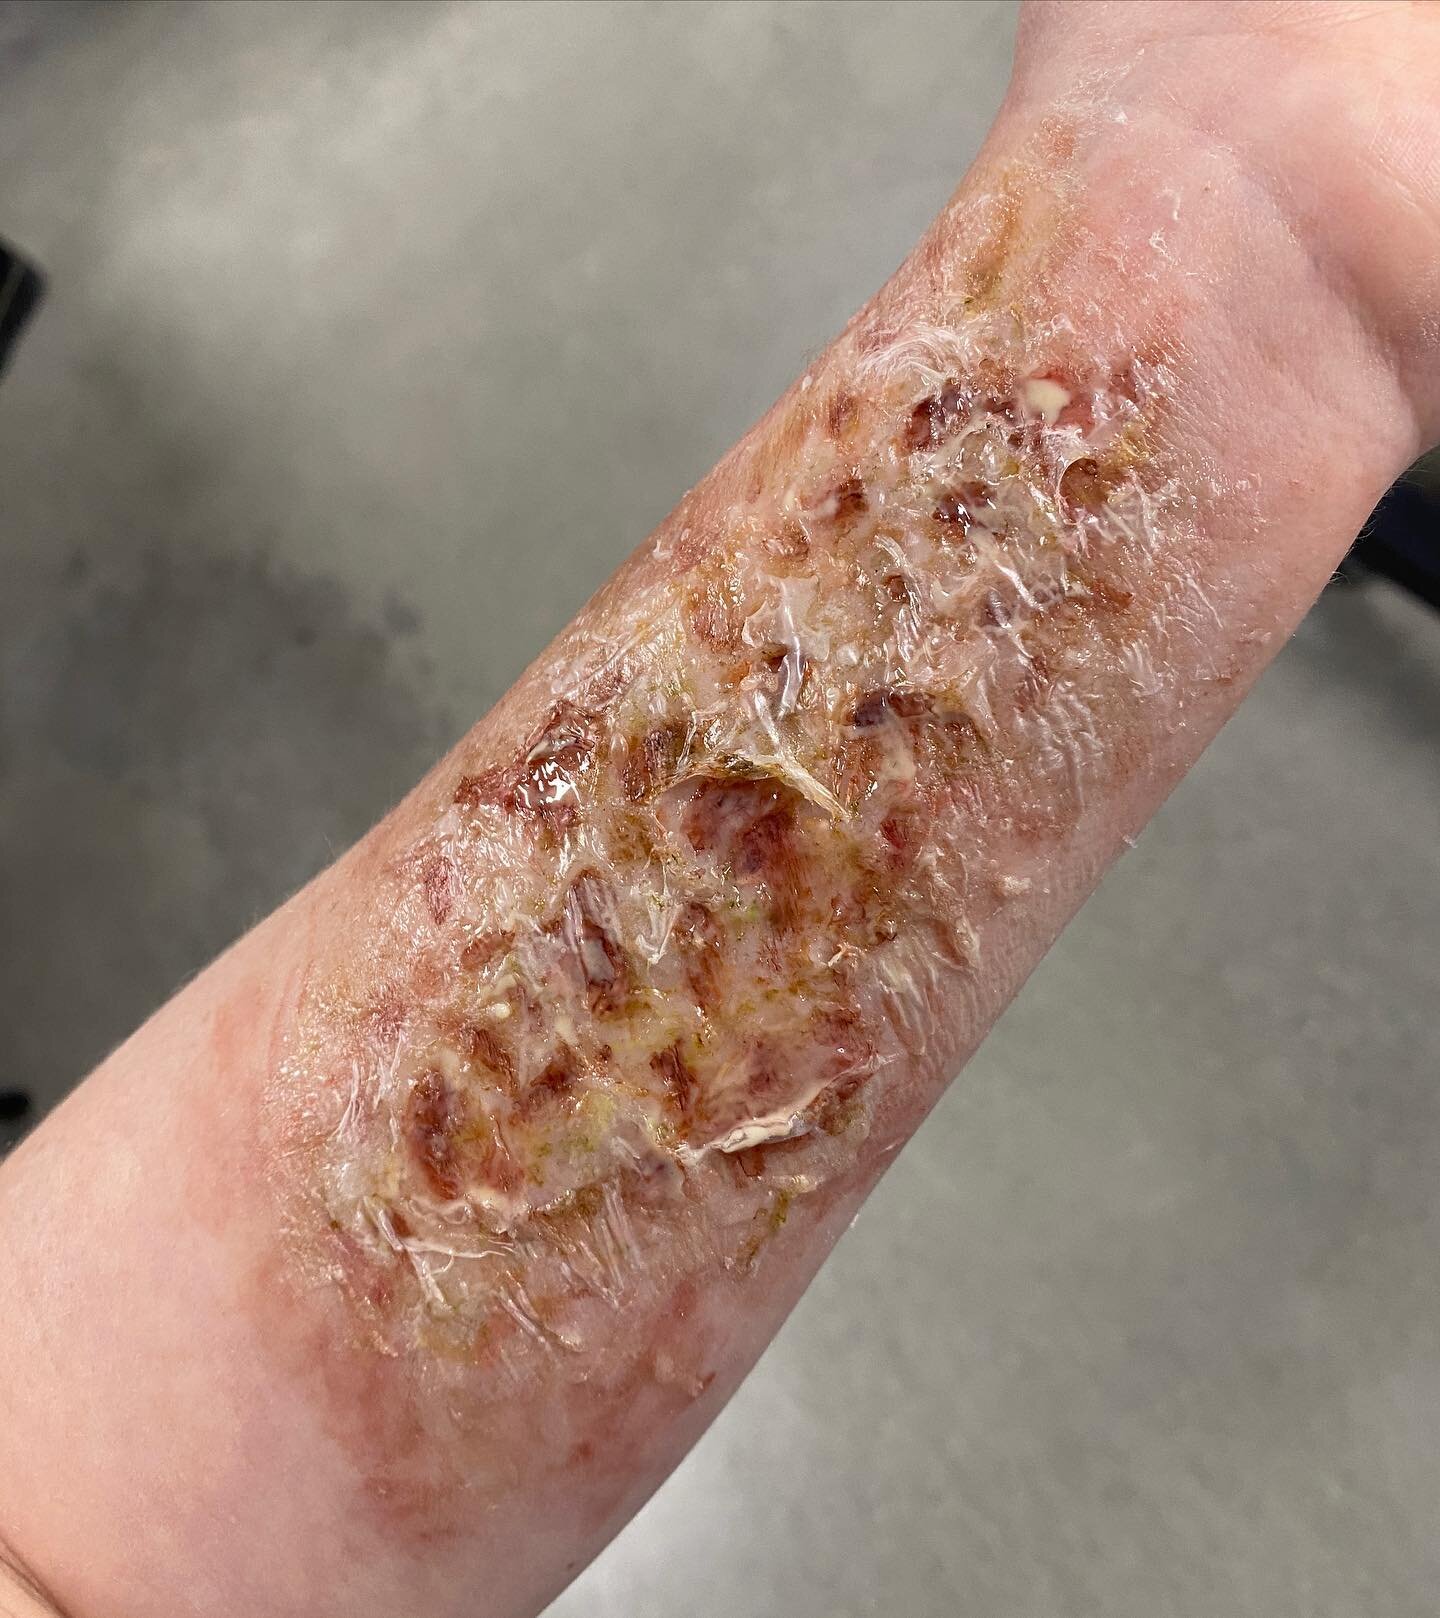 Another day, another burn 🔥 
This one was made with an underlay of @alconefx 3rd degree silicone and topped with a melted layer of plasticap. 🫠🫠🫠
#sfxmakeup #sfxmakeupartist #sfxmua #sfxmelbourne #burnmakeup #burns #thirddegreeburns #chemicalburn